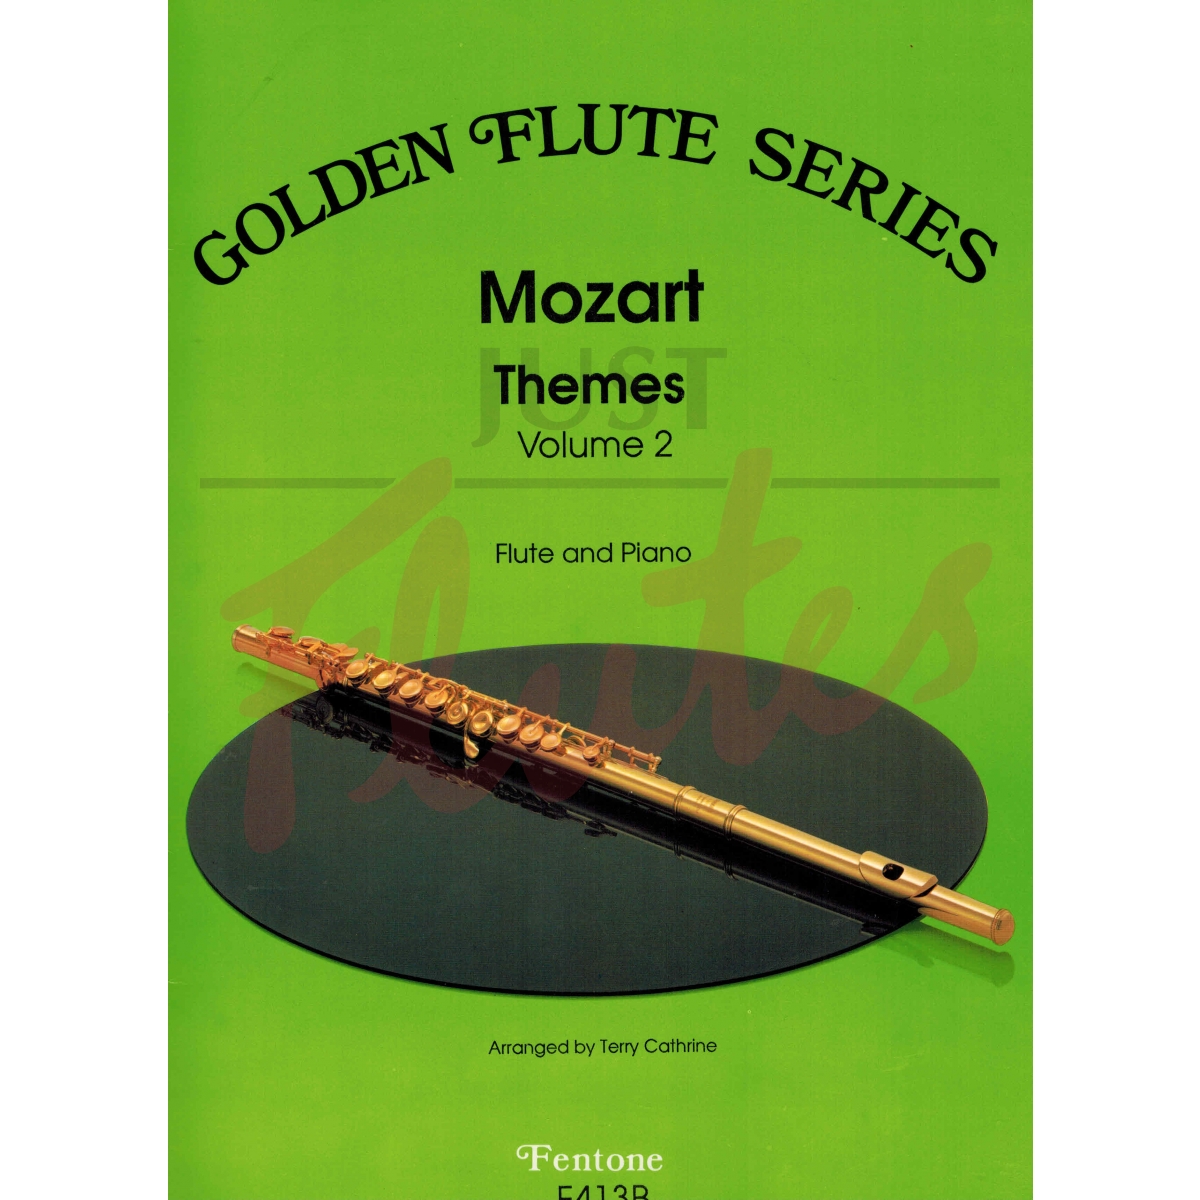 Themes Volume 2 for flute and piano